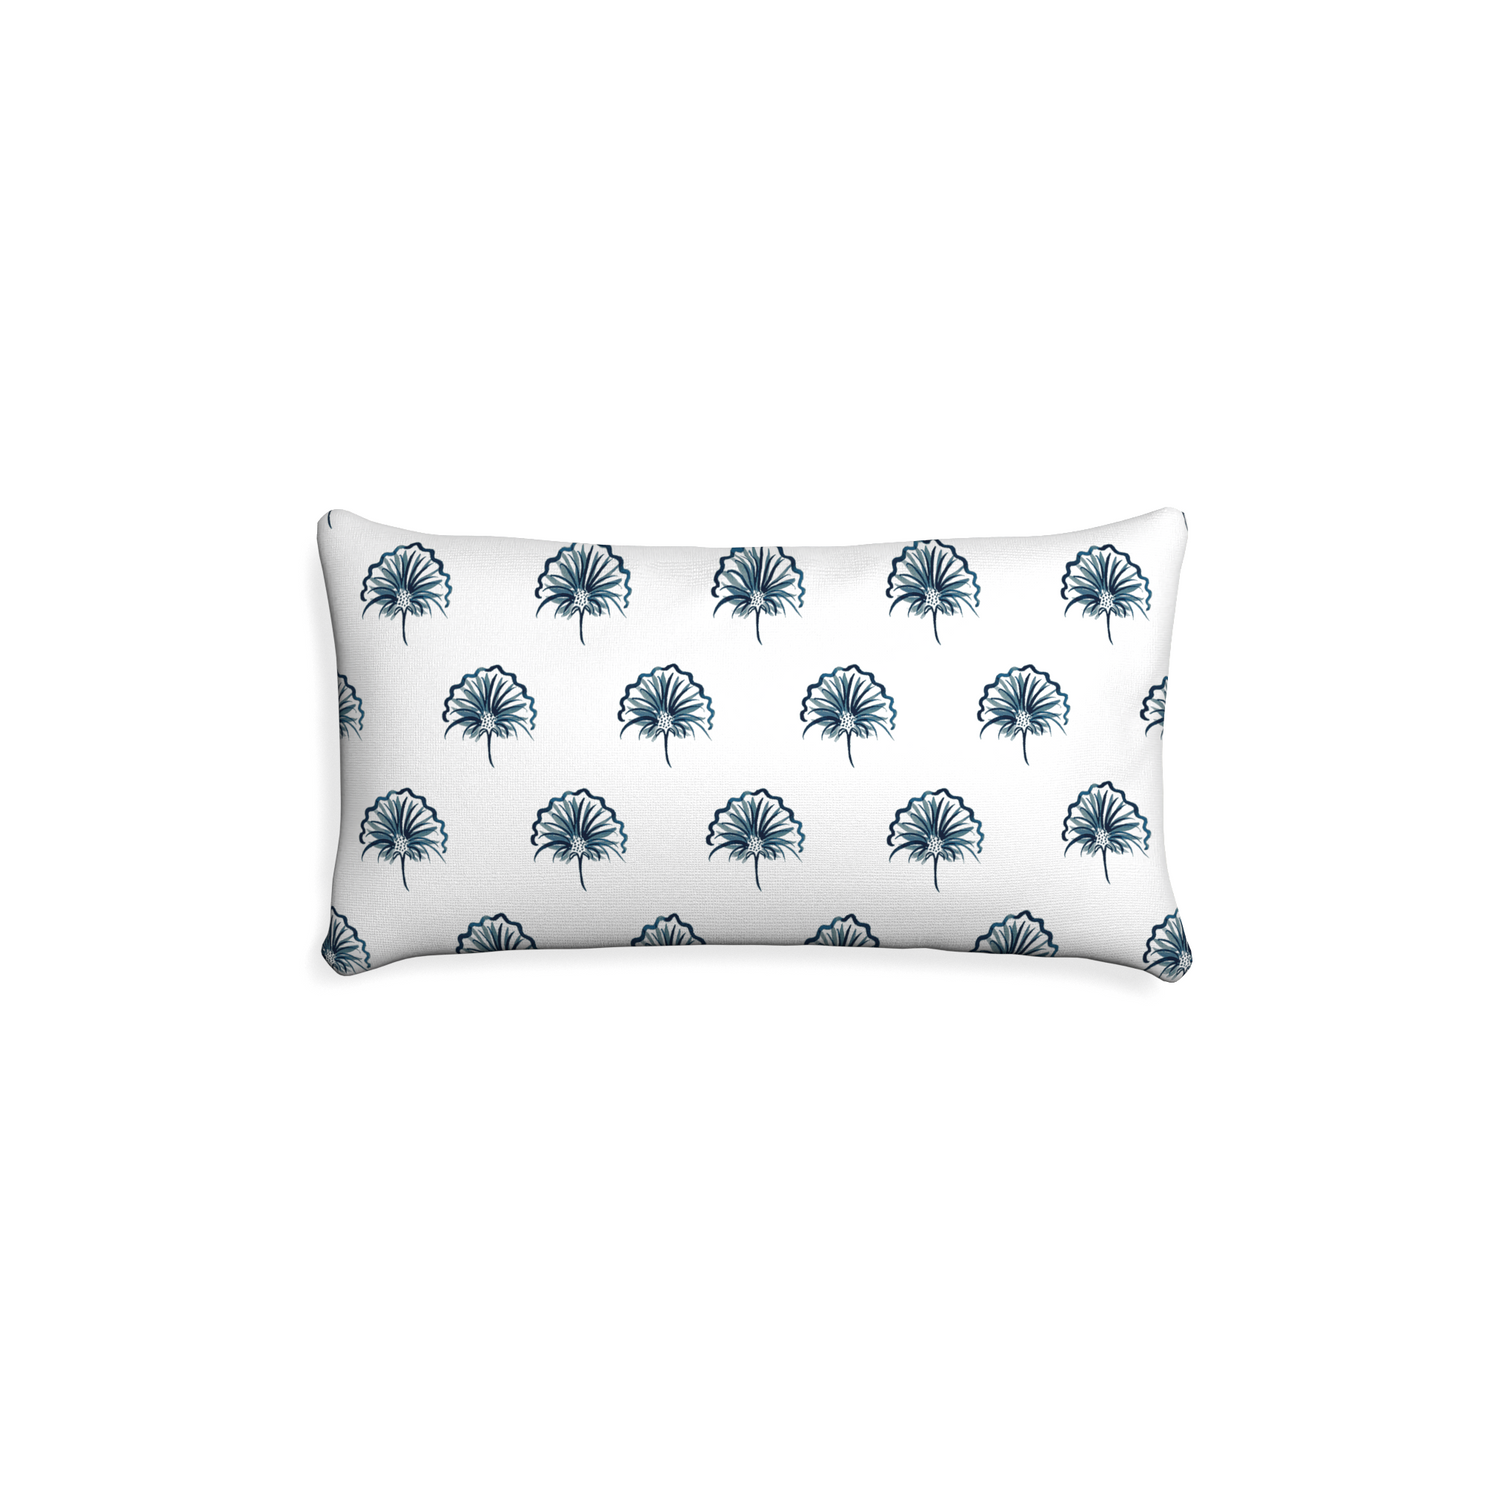 Petite-lumbar penelope midnight custom floral navypillow with none on white background